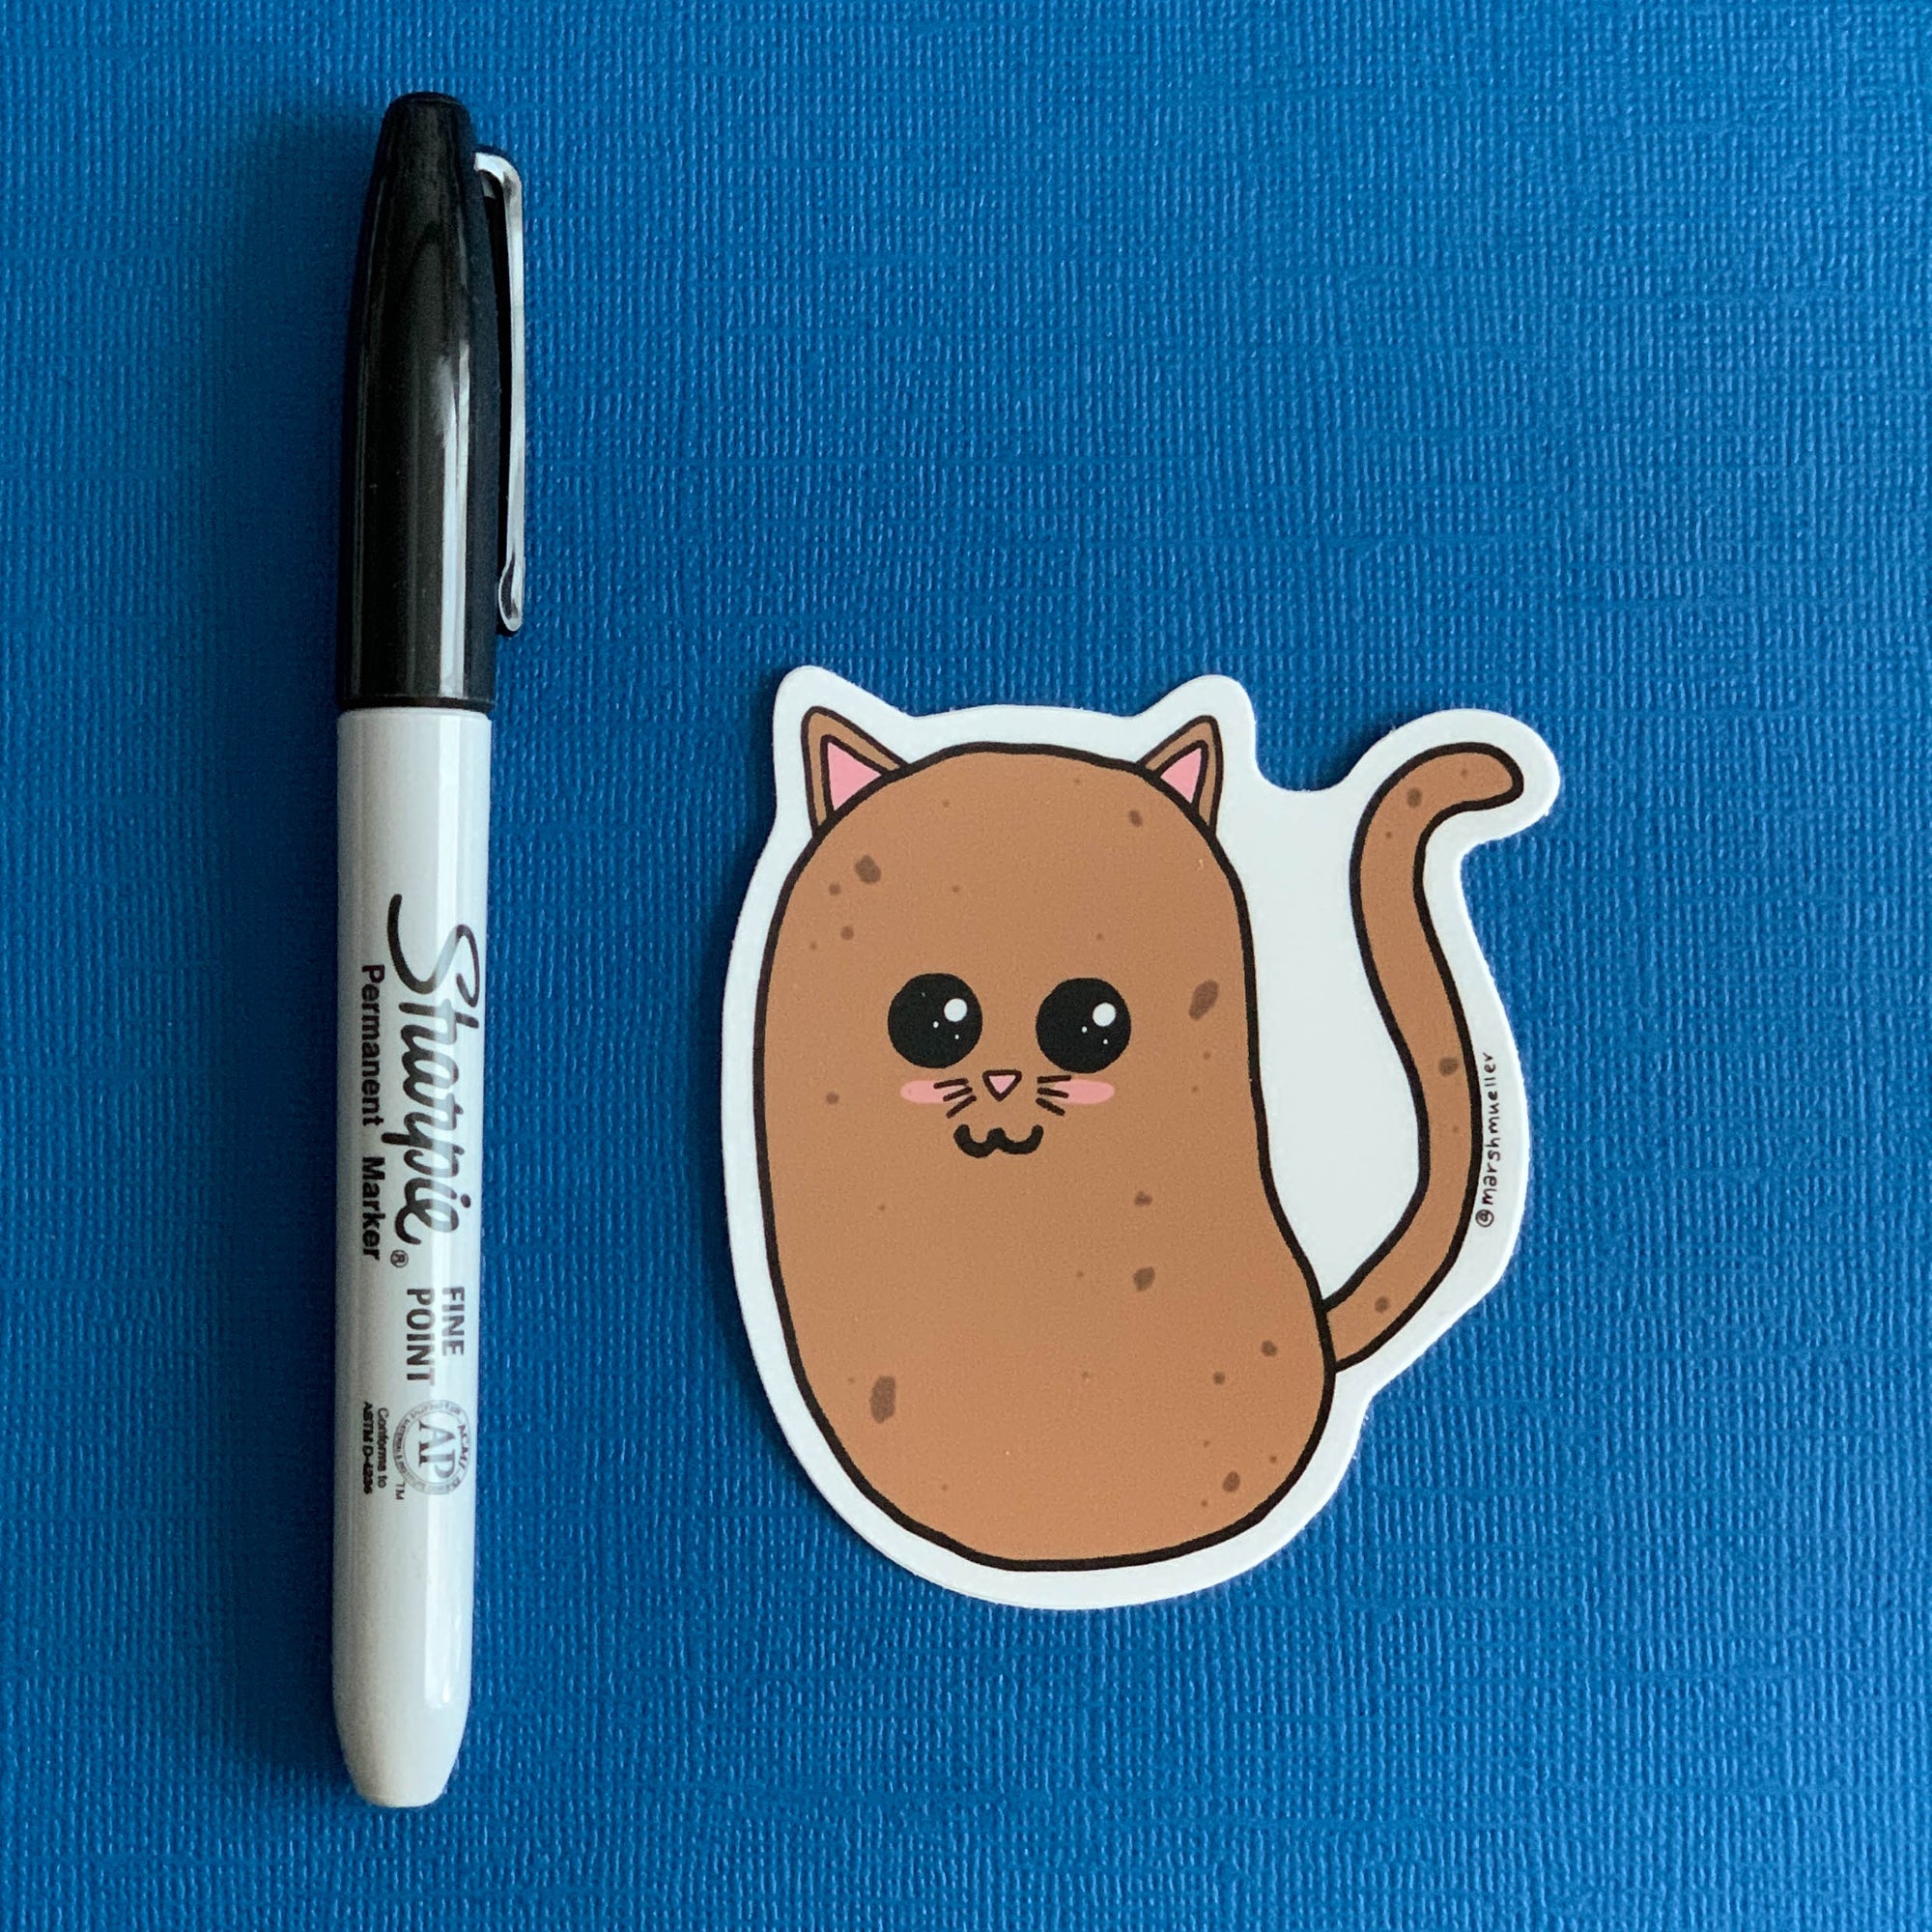 Potato Cat Die Cut sticker on a navy background next to a black Sharpie for scale